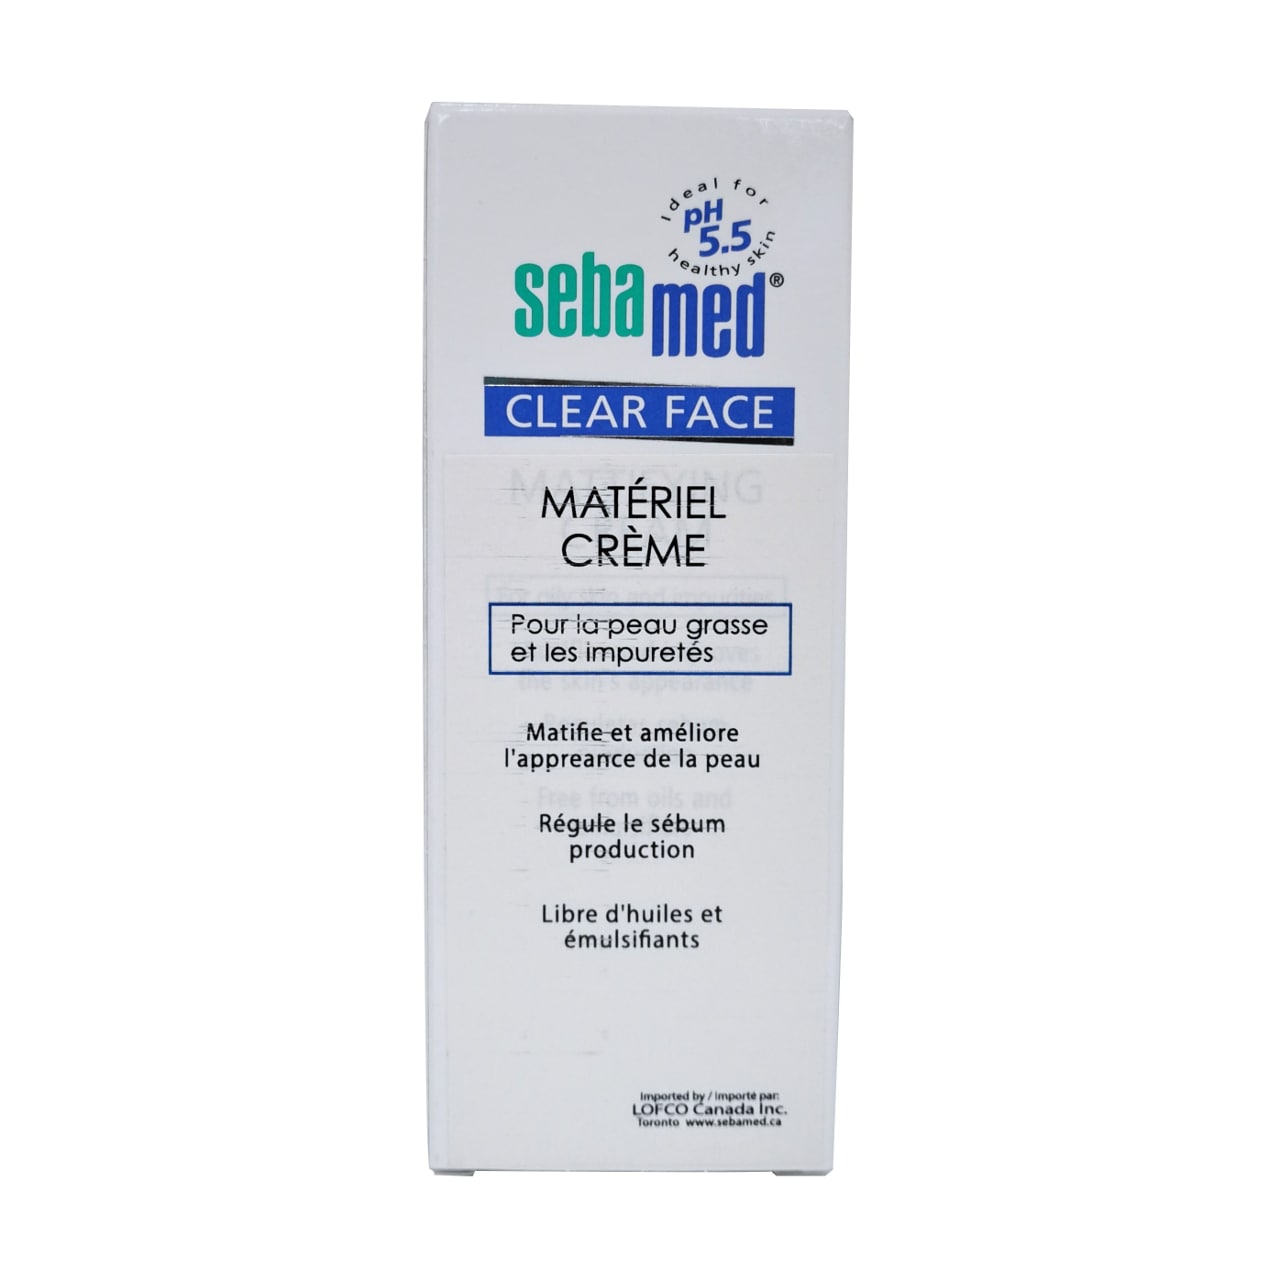 Product label for Sebamed Clear Face Mattifying Cream in French